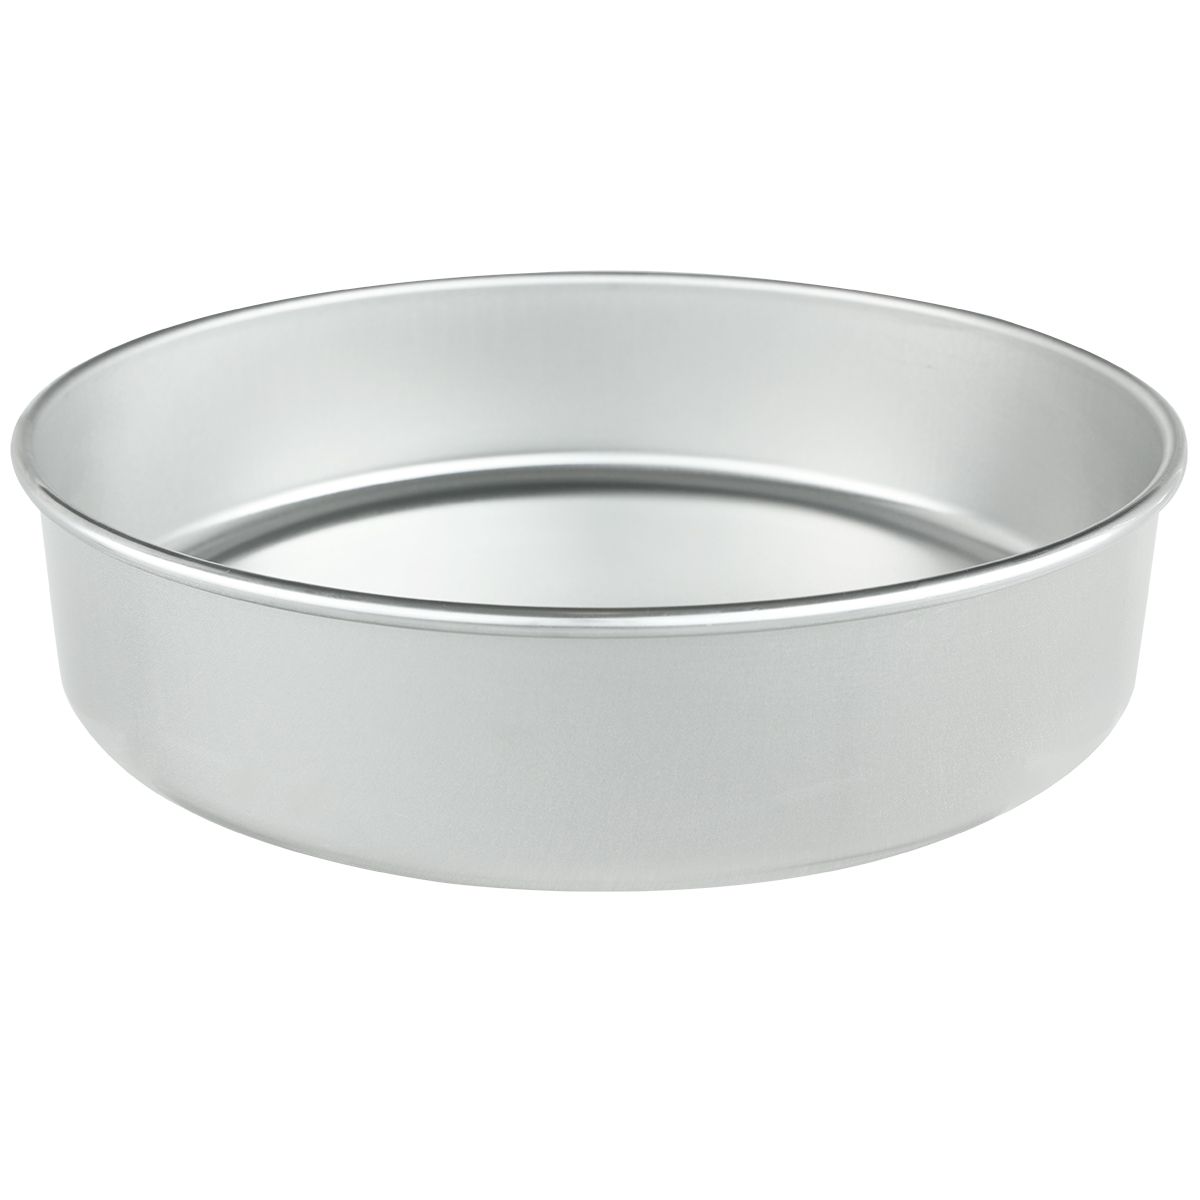 https://static.restaurantsupply.com/media/catalog/product/cache/58705eee992a0d7bab305099af29f9ee/1/2/12-x-3-aluminum-cake-pan-chef-approved-224276.jpg